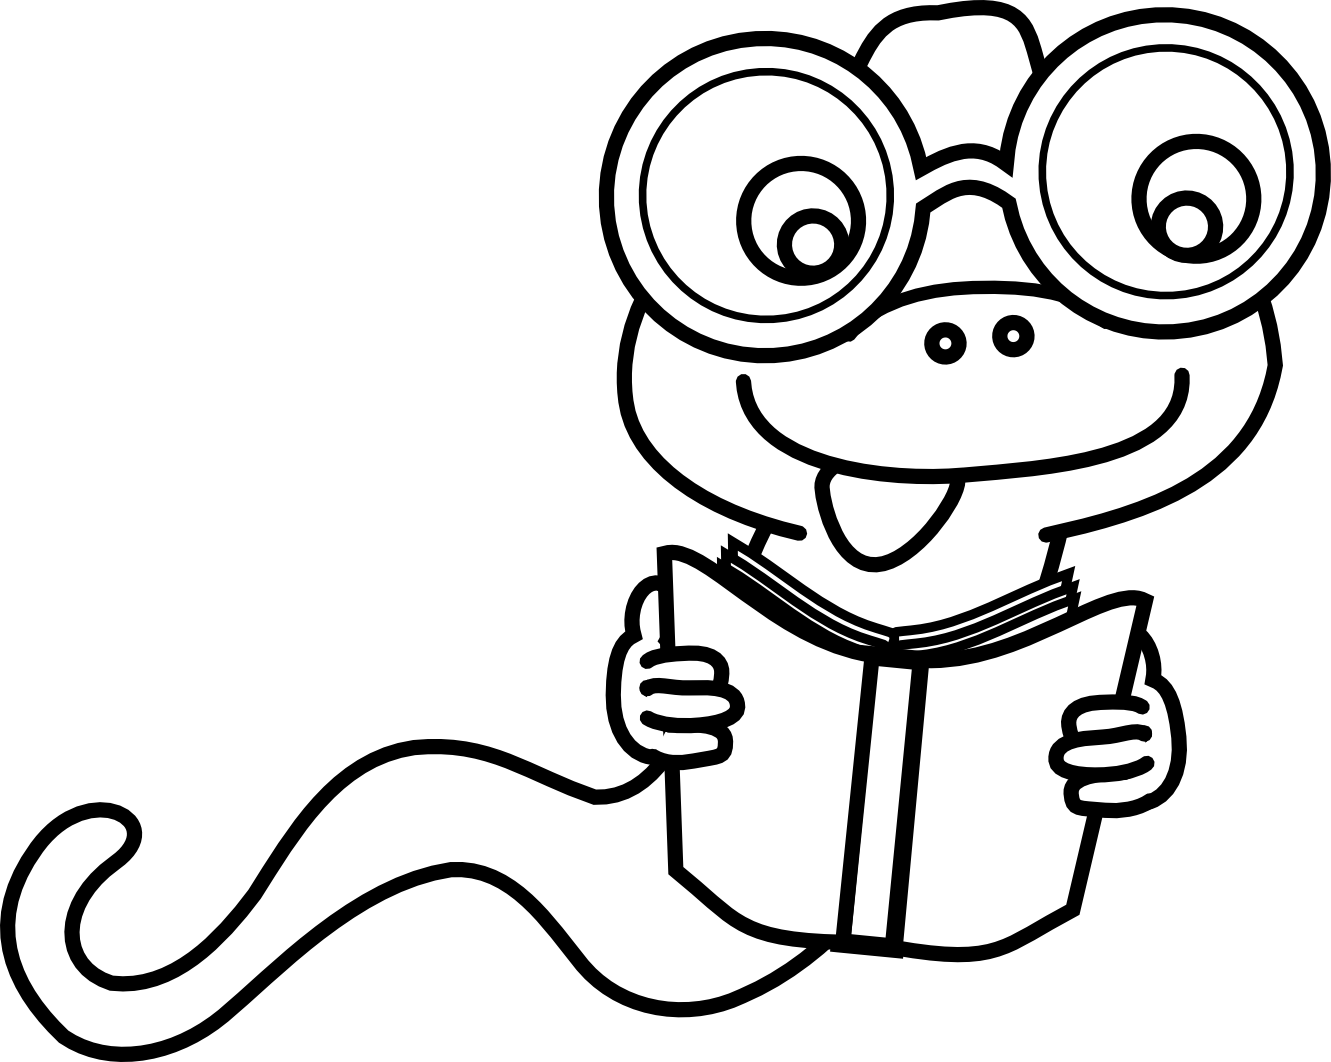 Book worm panda free. Bookworm clipart black and white